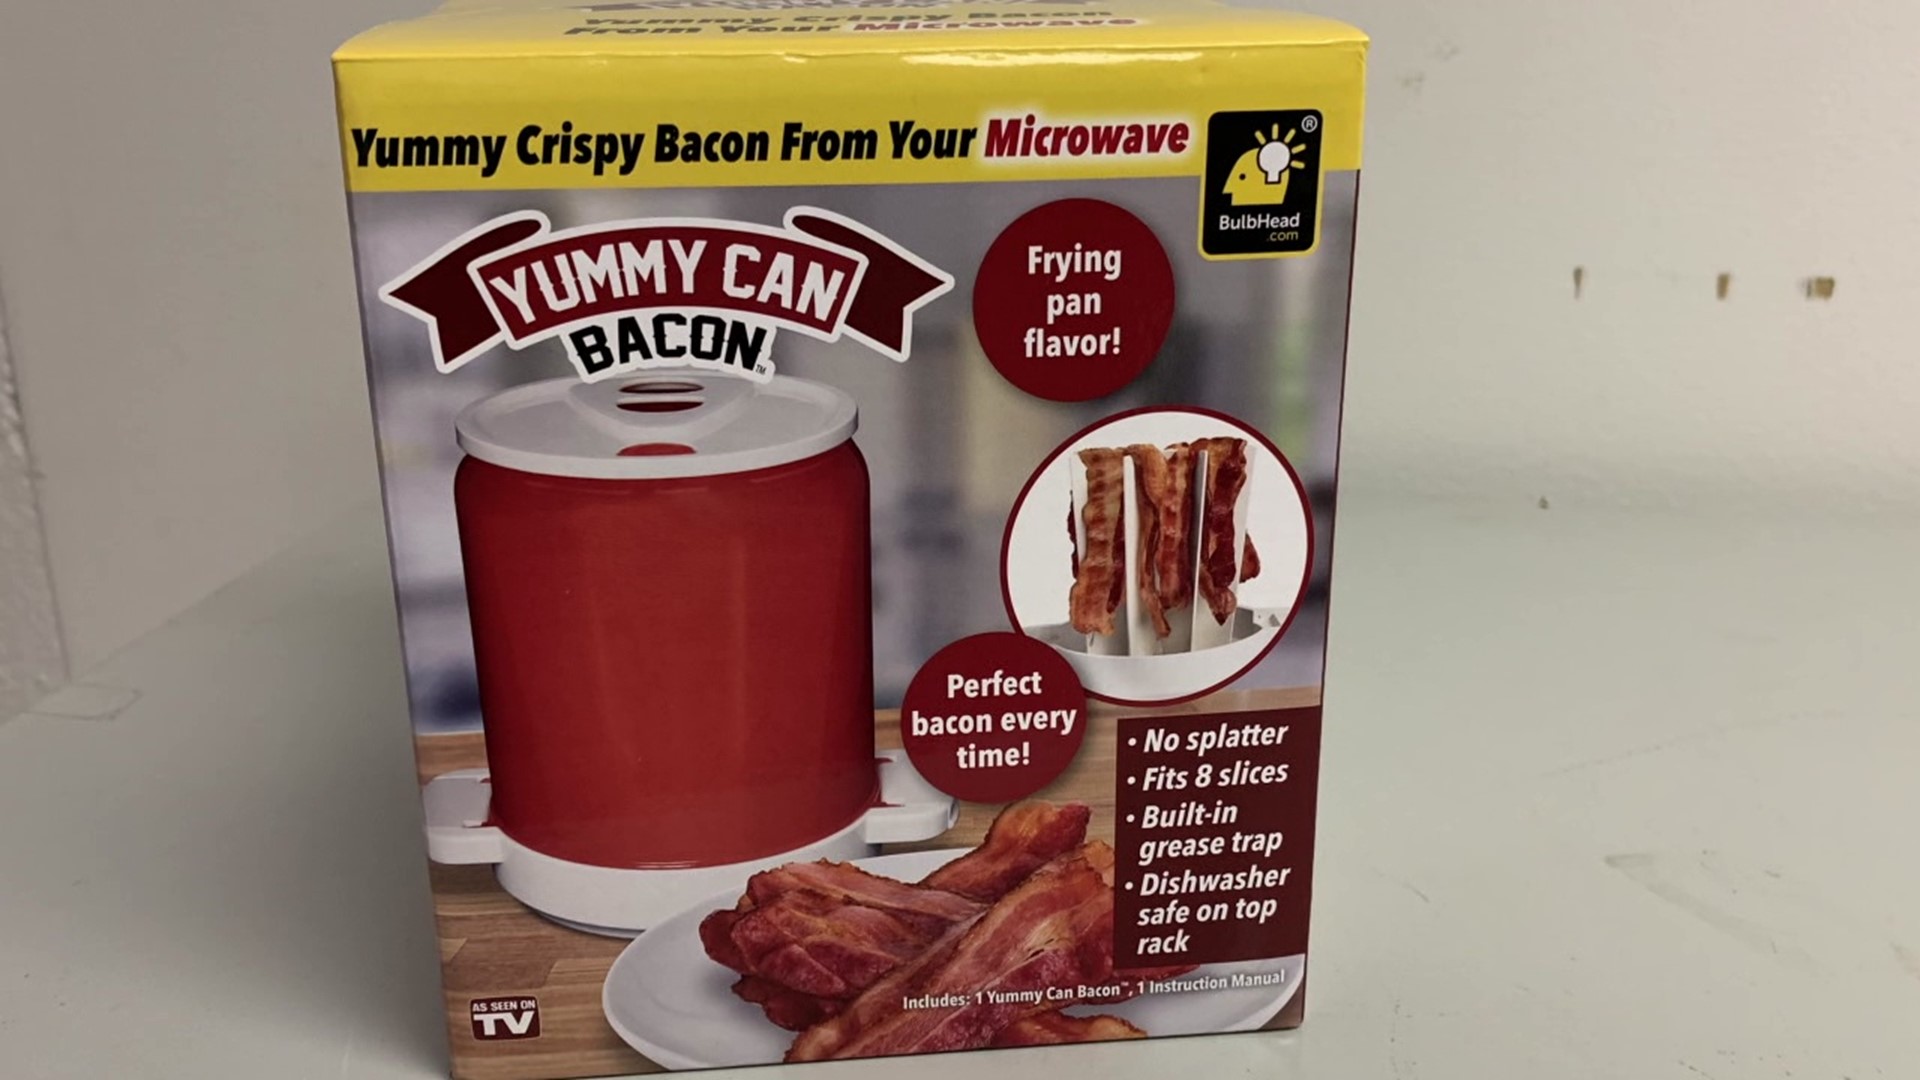 The maker claims that it will make perfect bacon every time and it gives you frying pan flavor without all the grease.